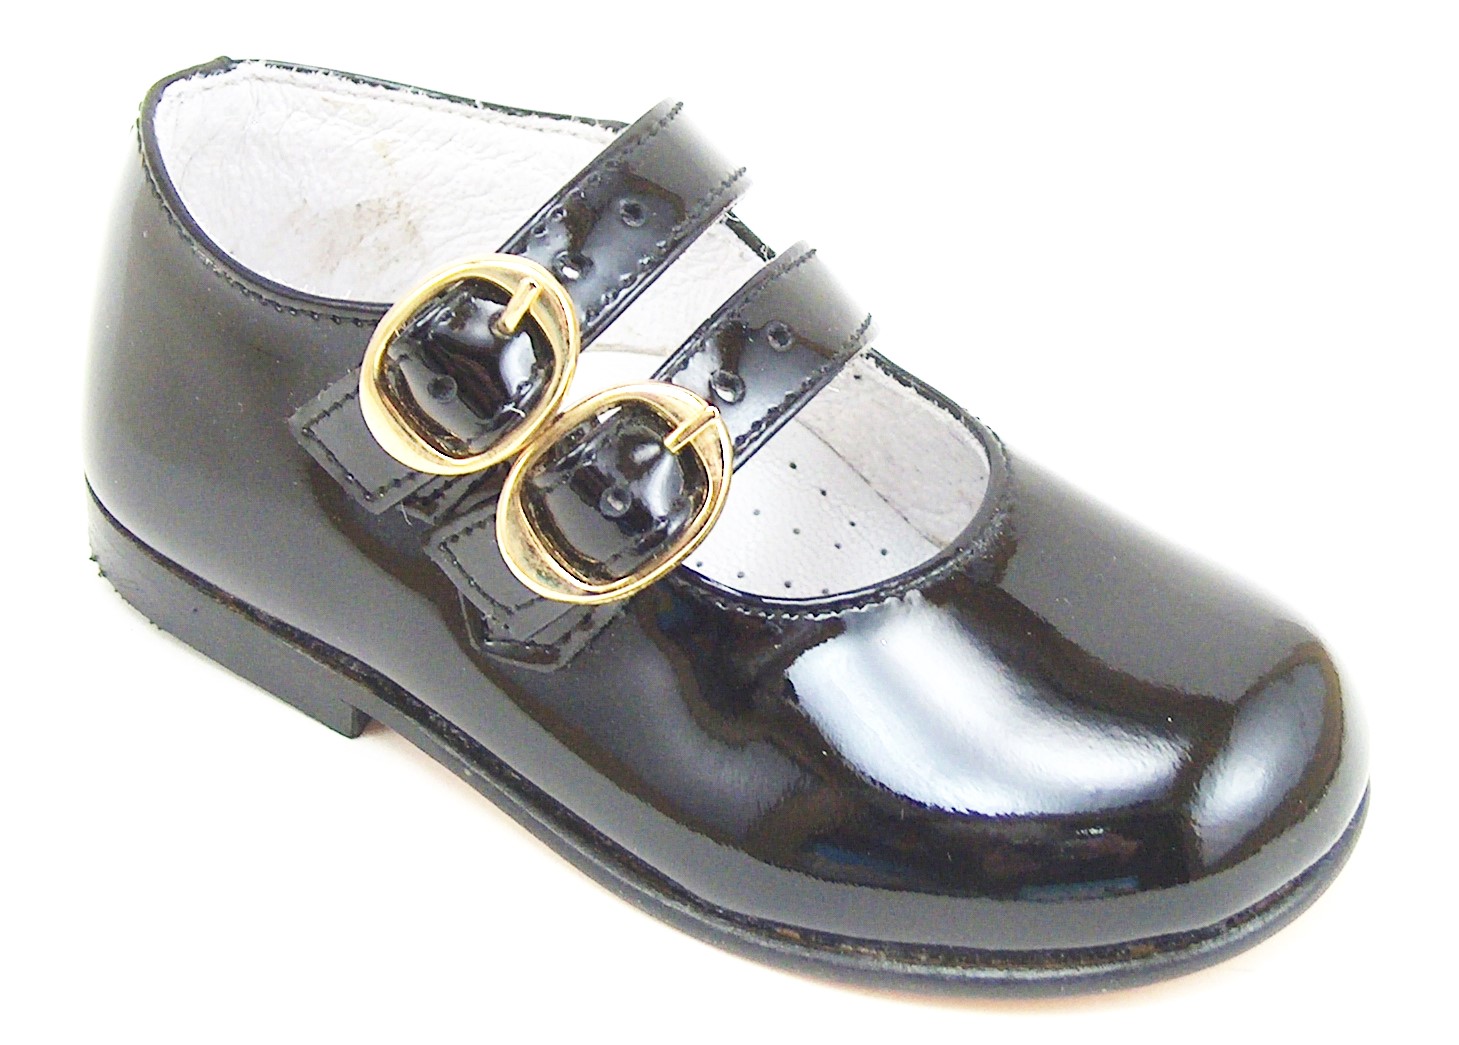 FARO F-2969 - Black Patent Double Buckle Mary Janes